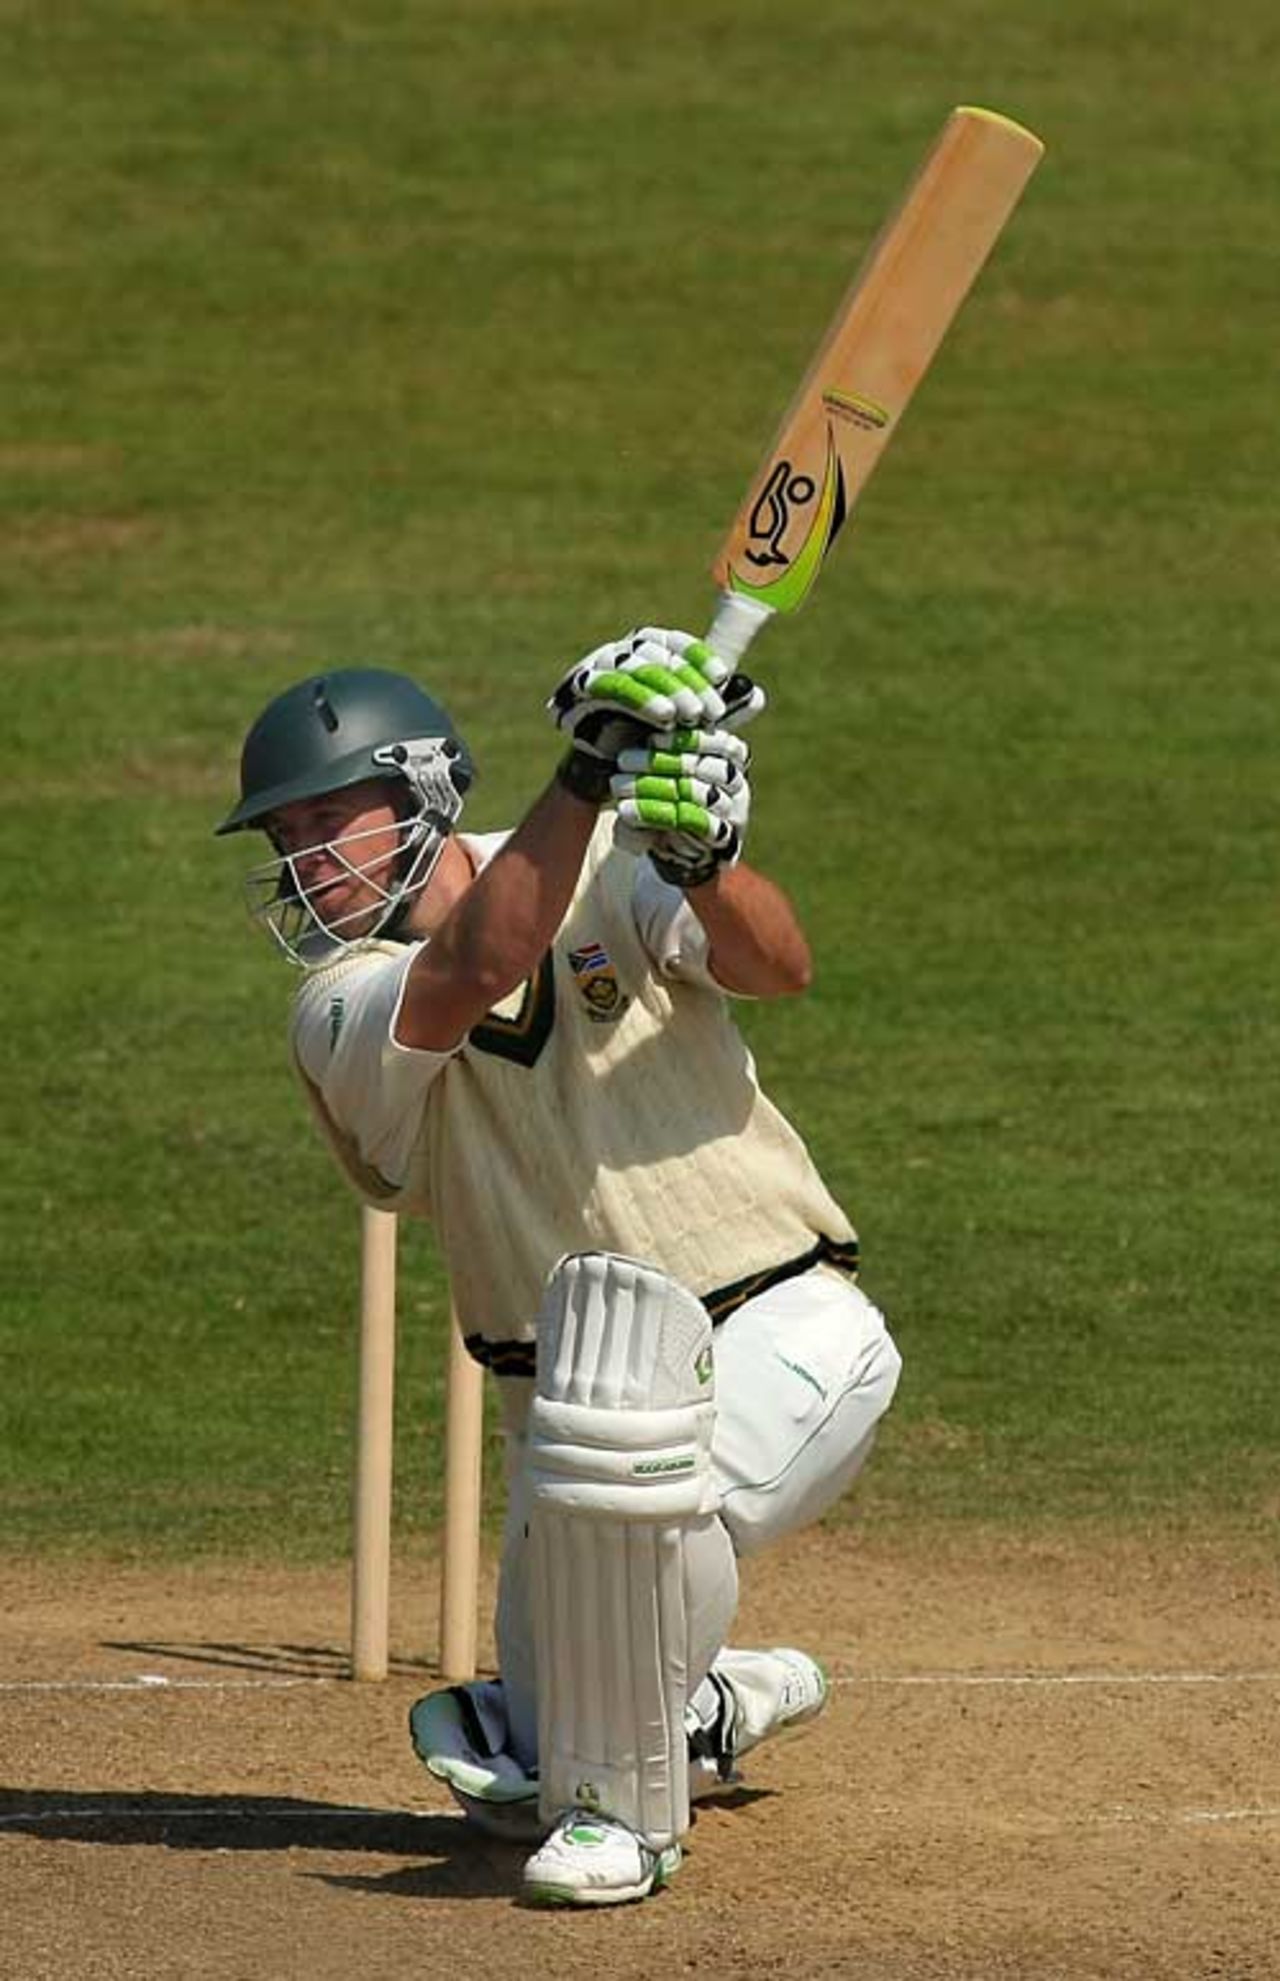 AB de Villiers flays a drive through the covers, Somerset v South Africans, 3rd day, Taunton, July 1, 2008